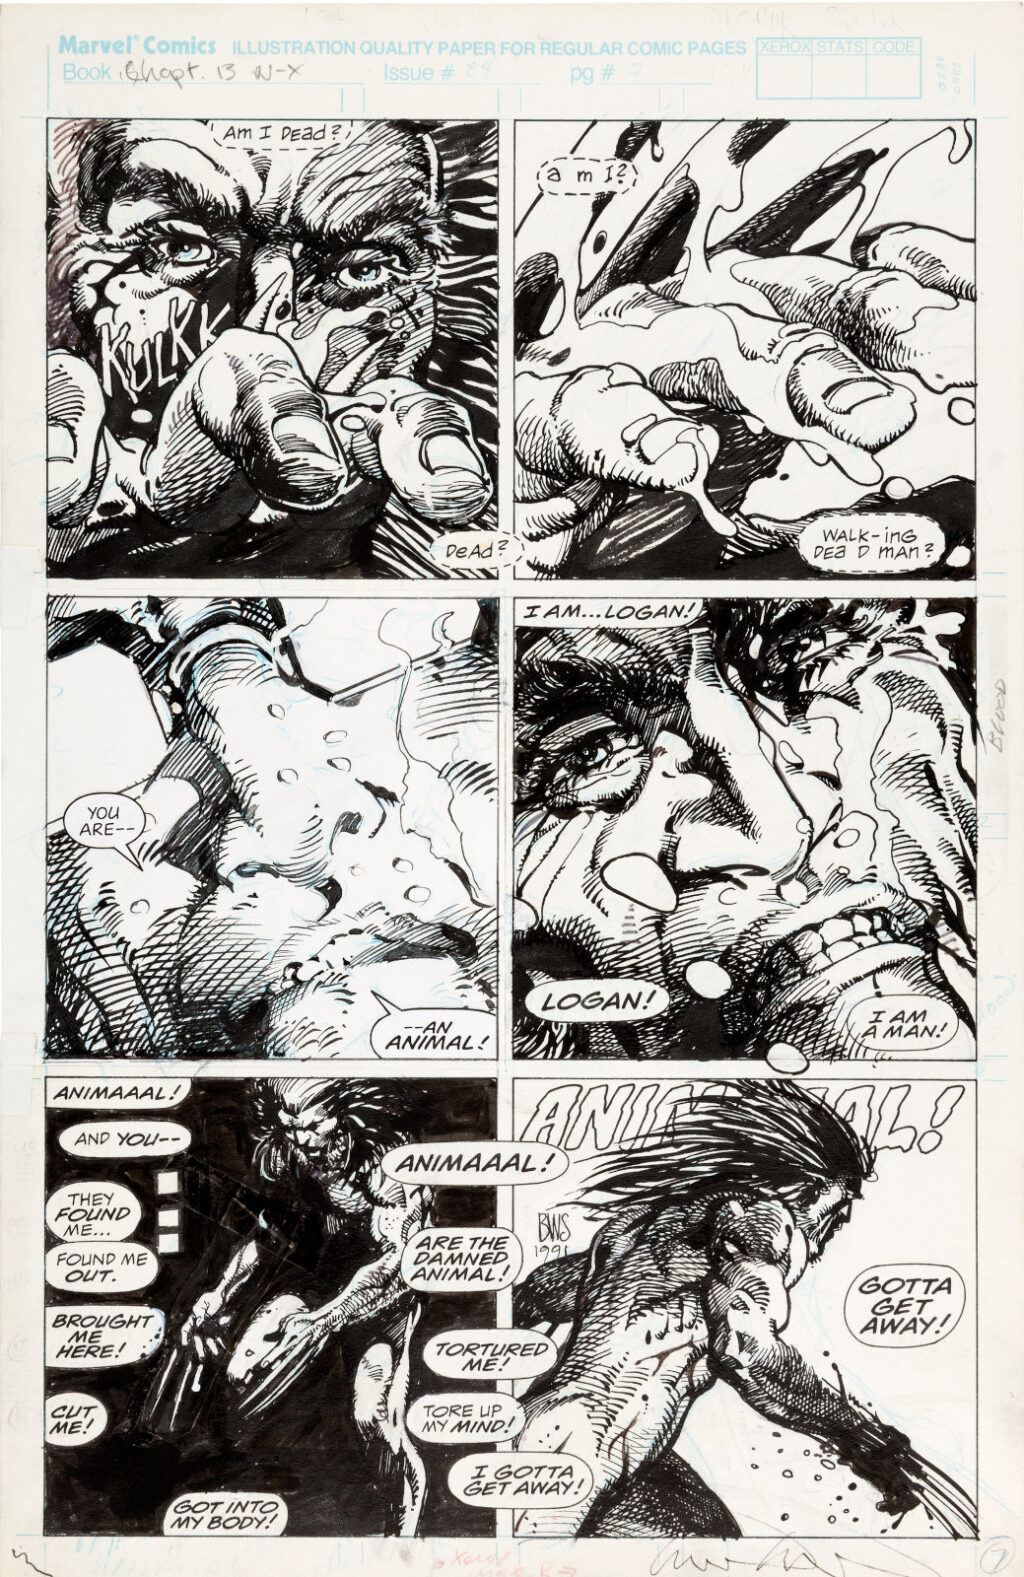 Marvel Comics Presents issue 84 page 8 by Barry Windsor Smith